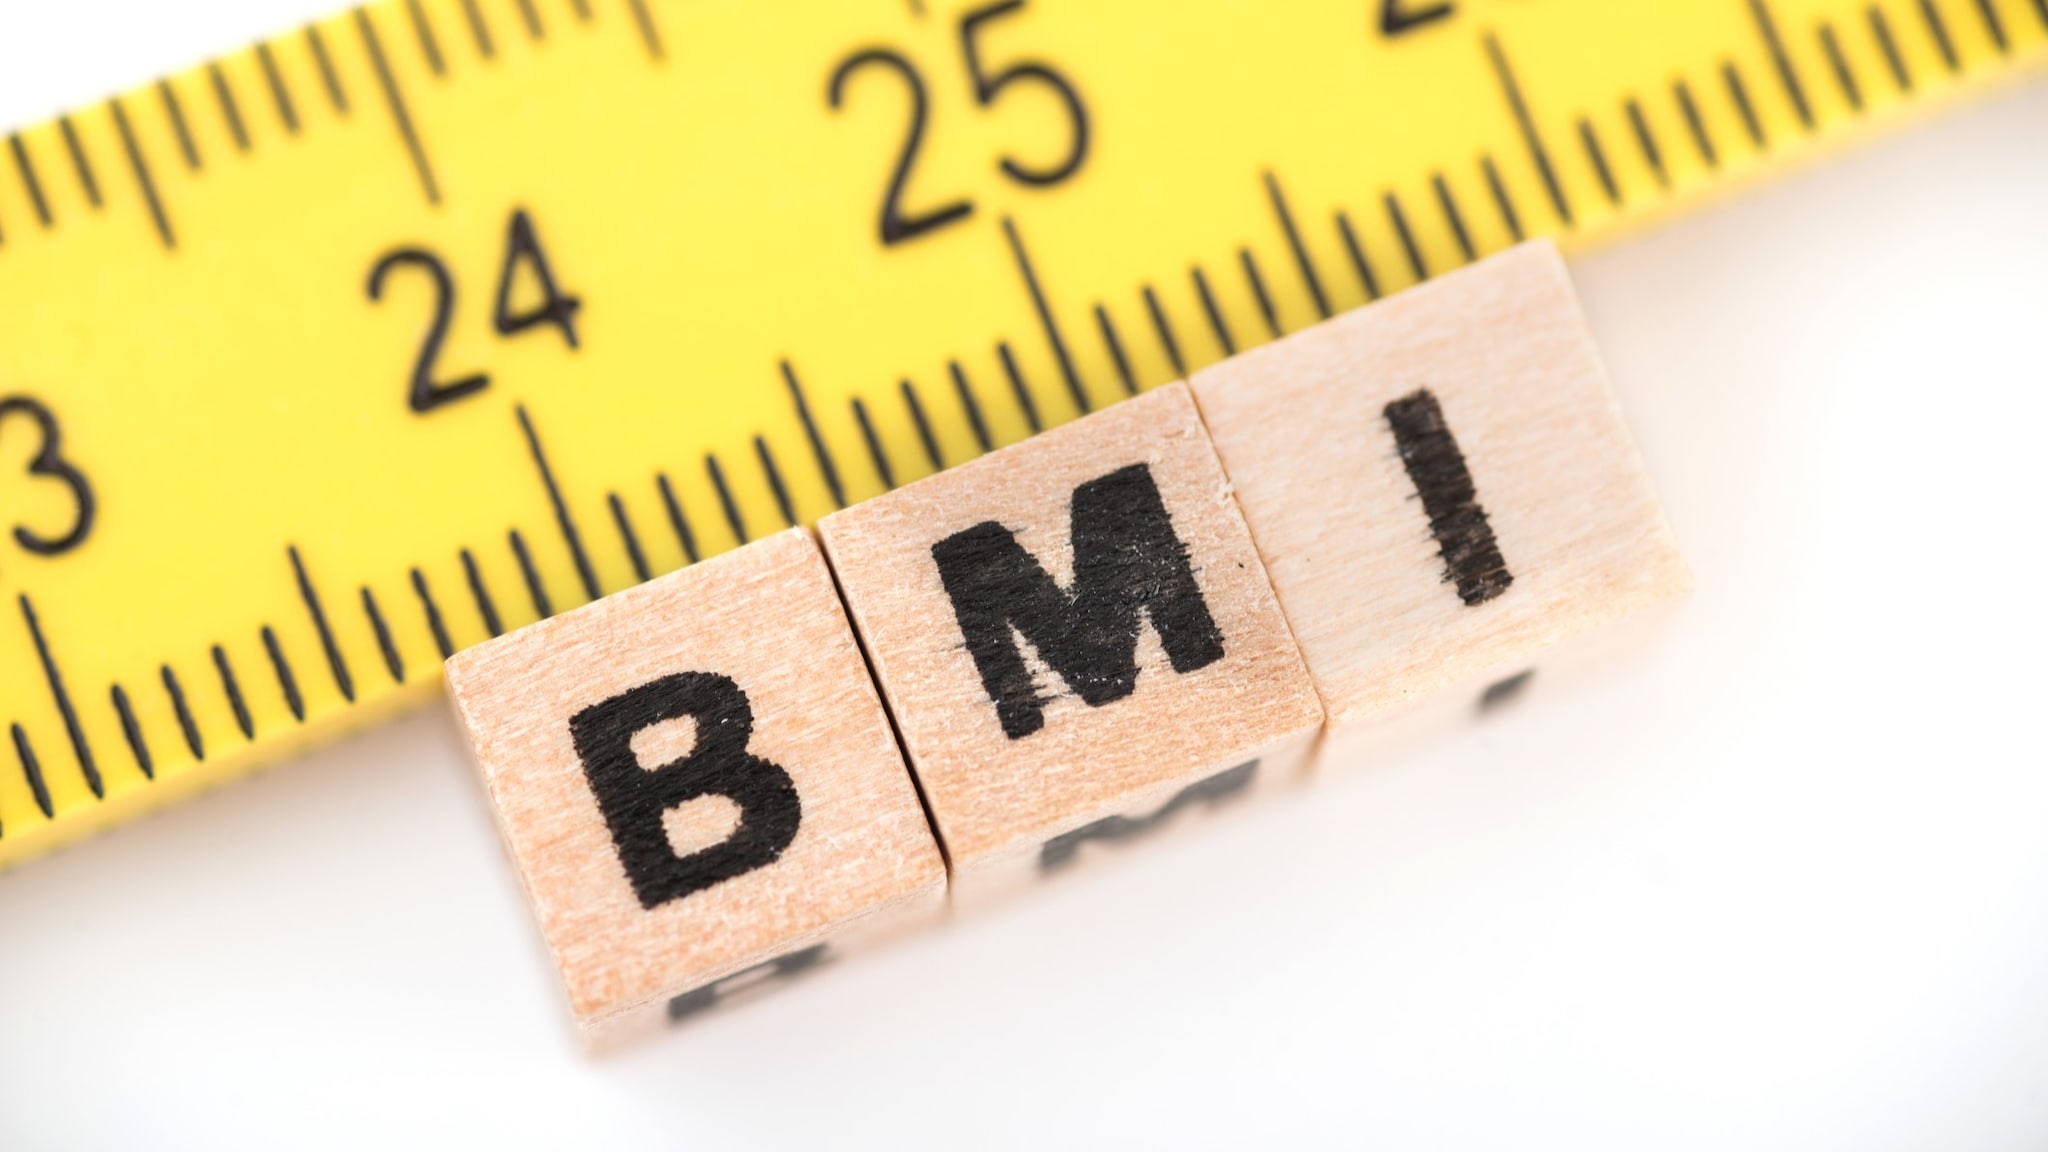 Block letters spelling BMI and a tape measure